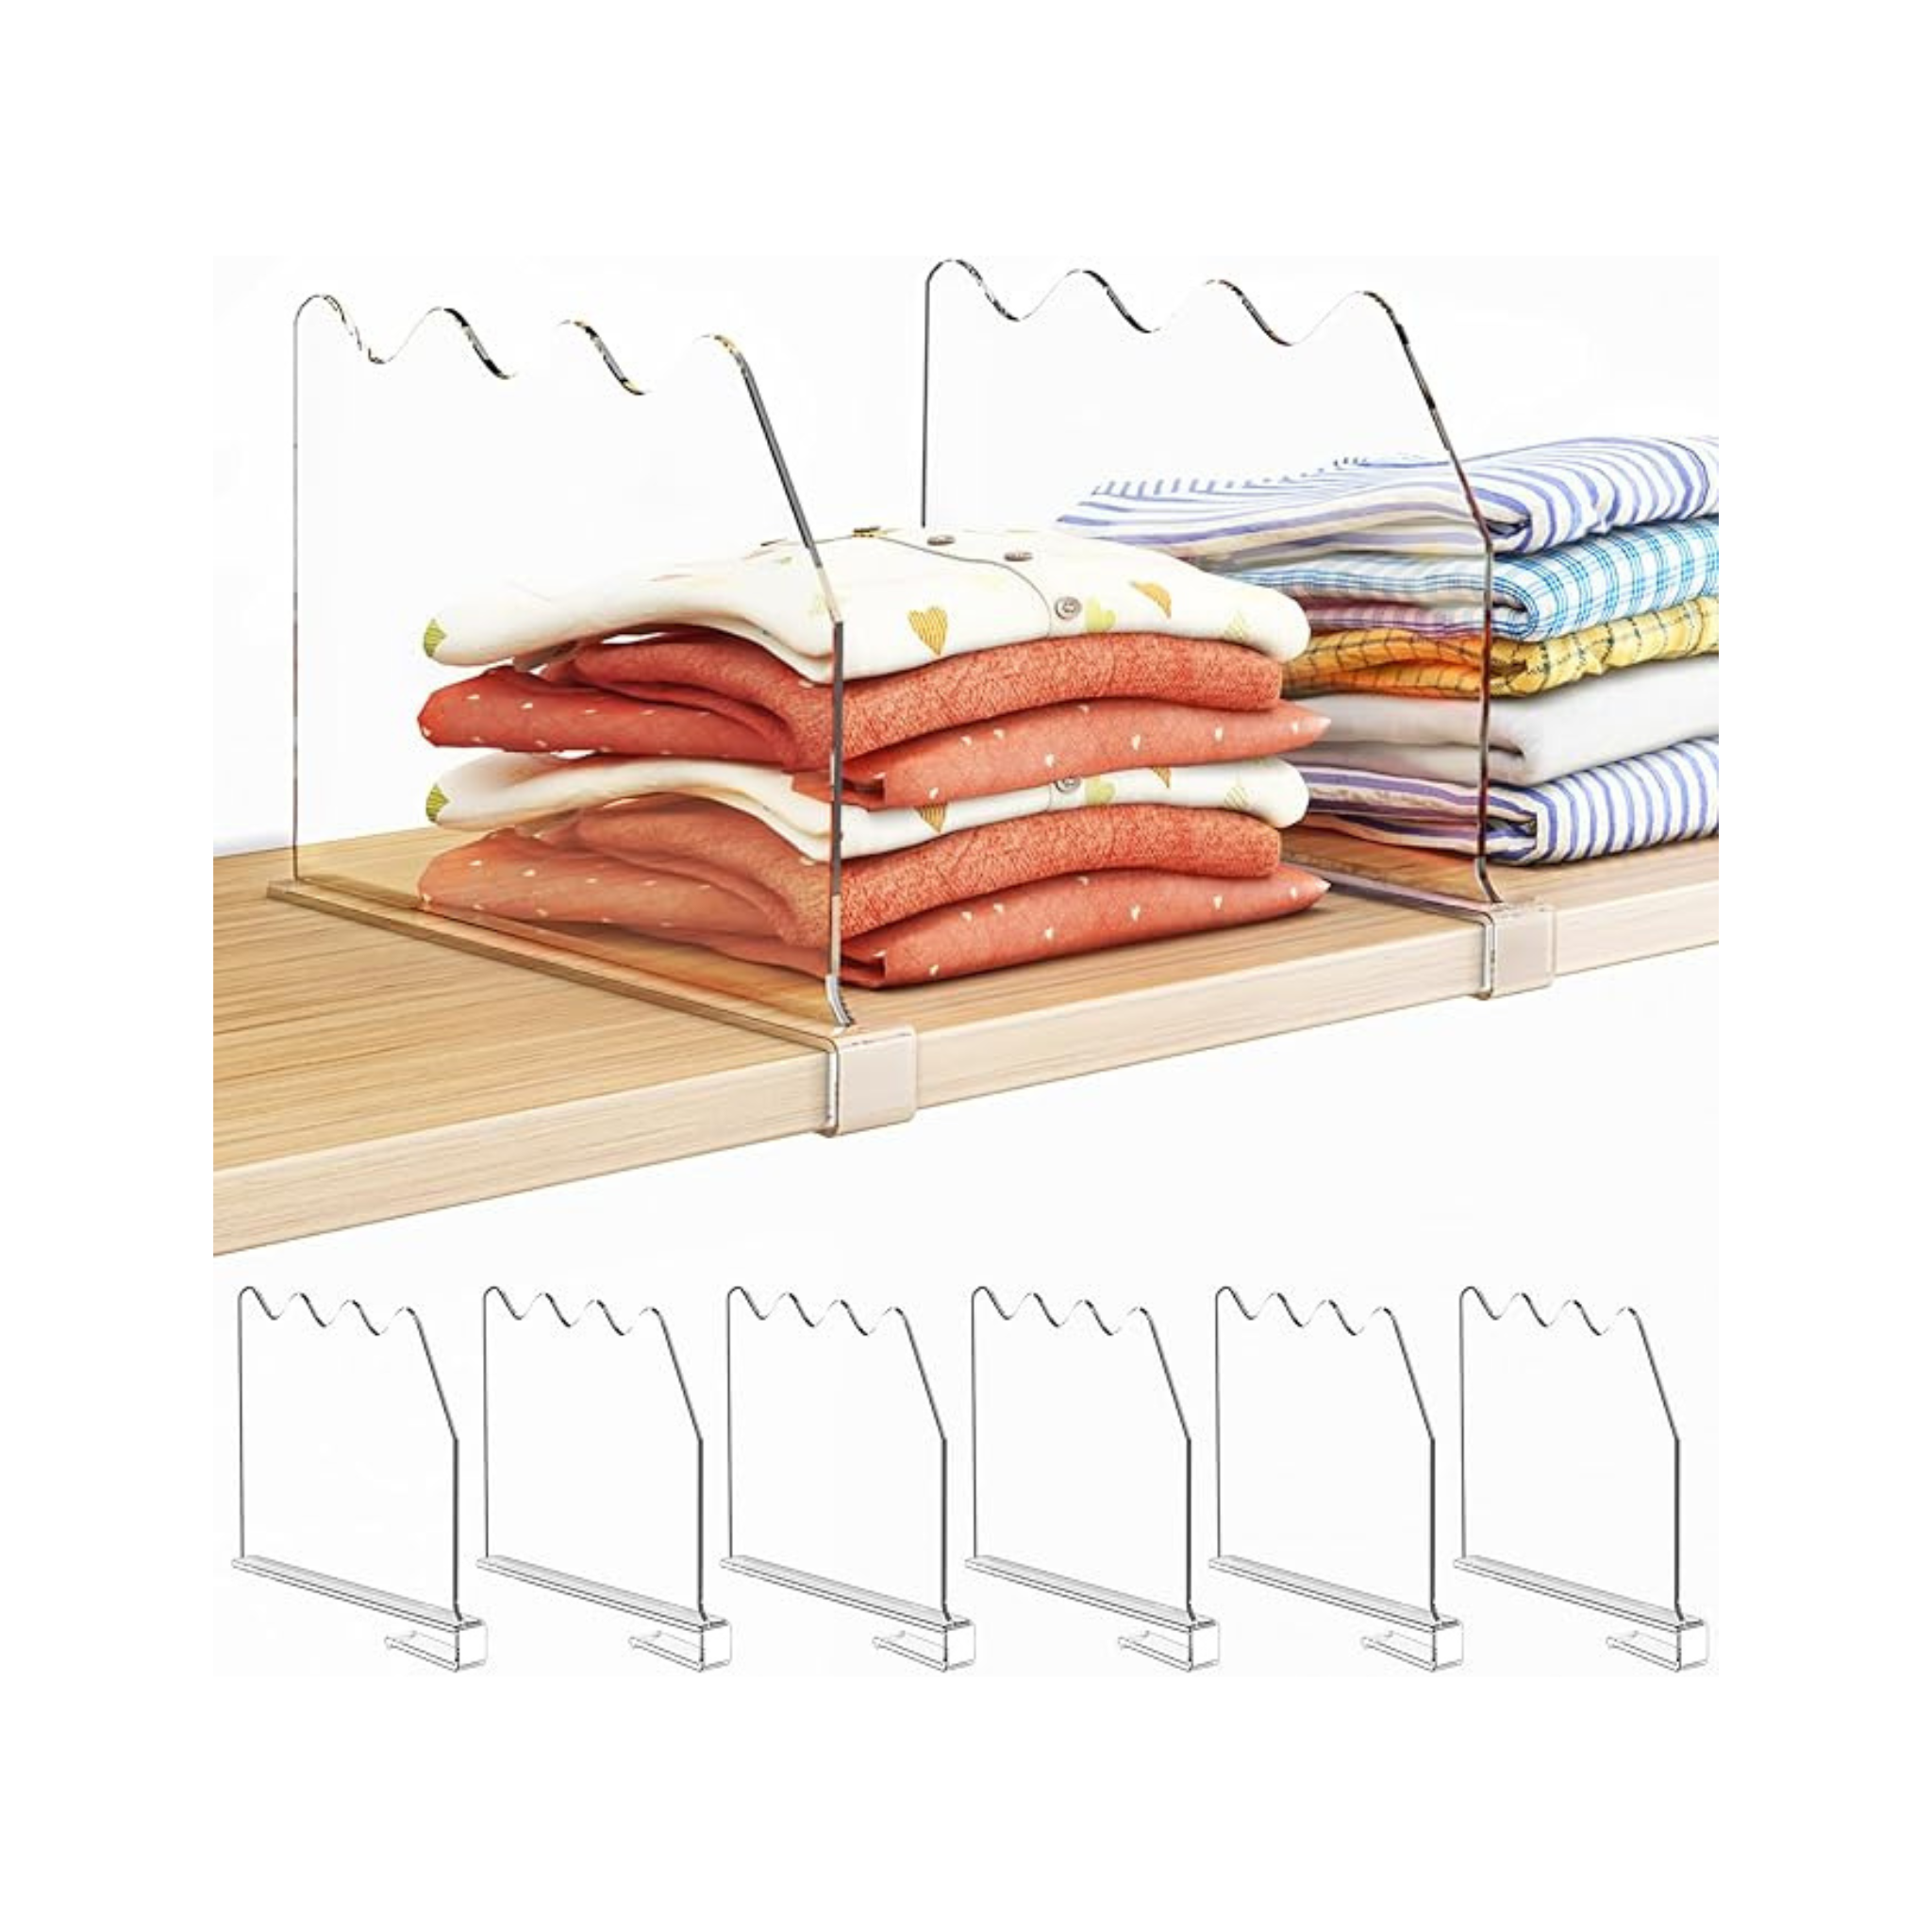 Spacekeeper Clear Shelf Dividers for Closet Organization, 6 Pack